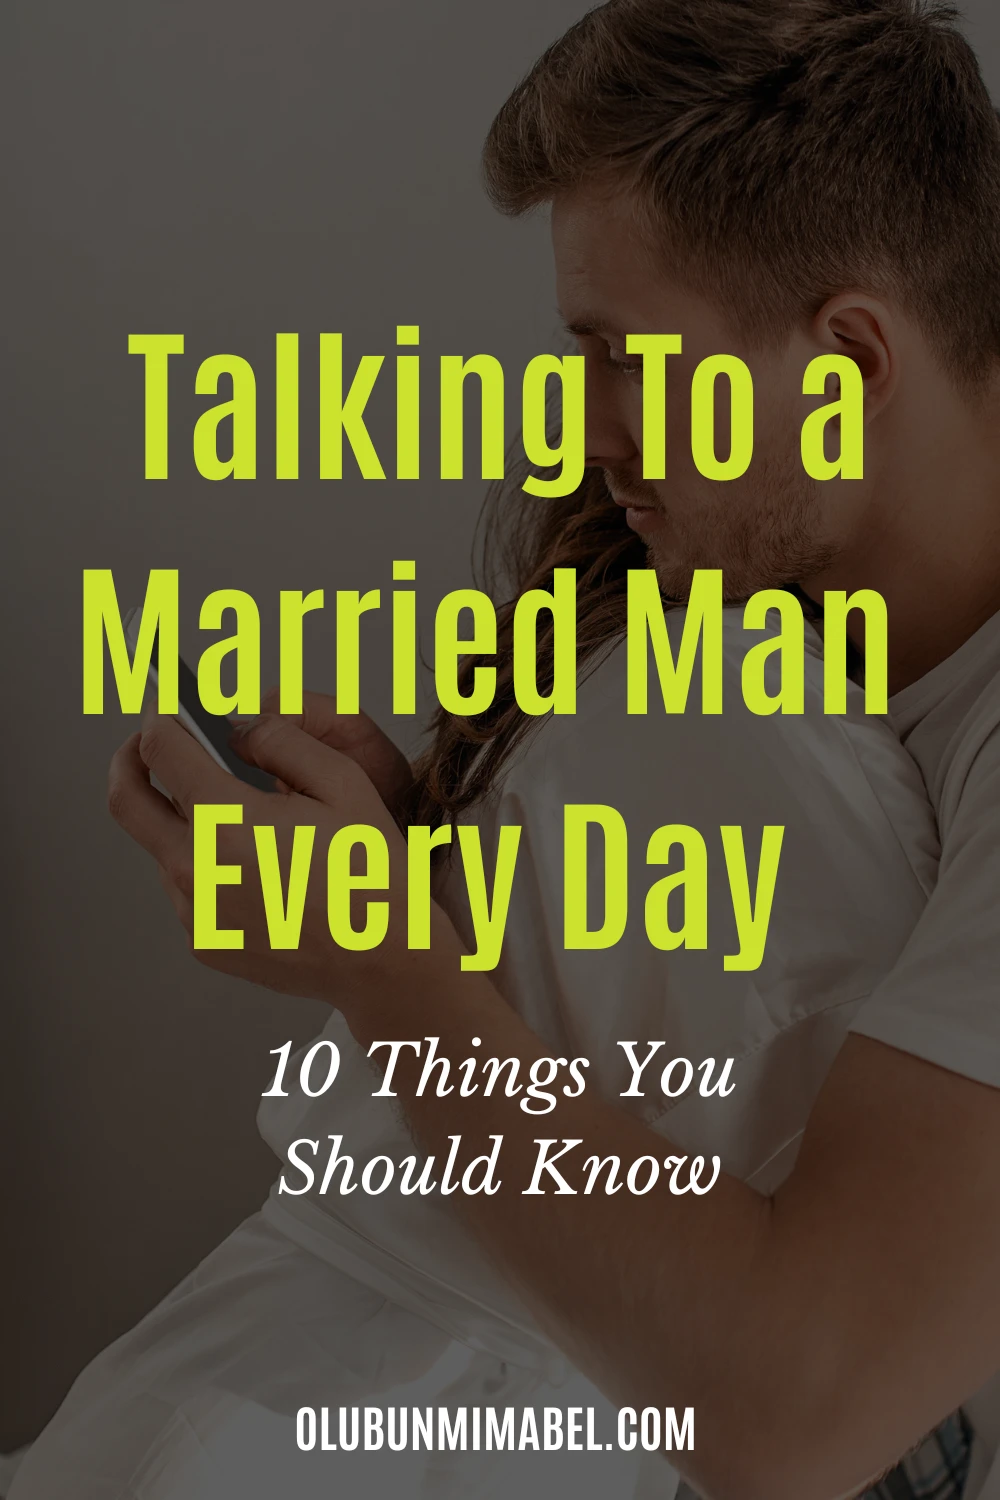 Talking To a Married Man Every Day